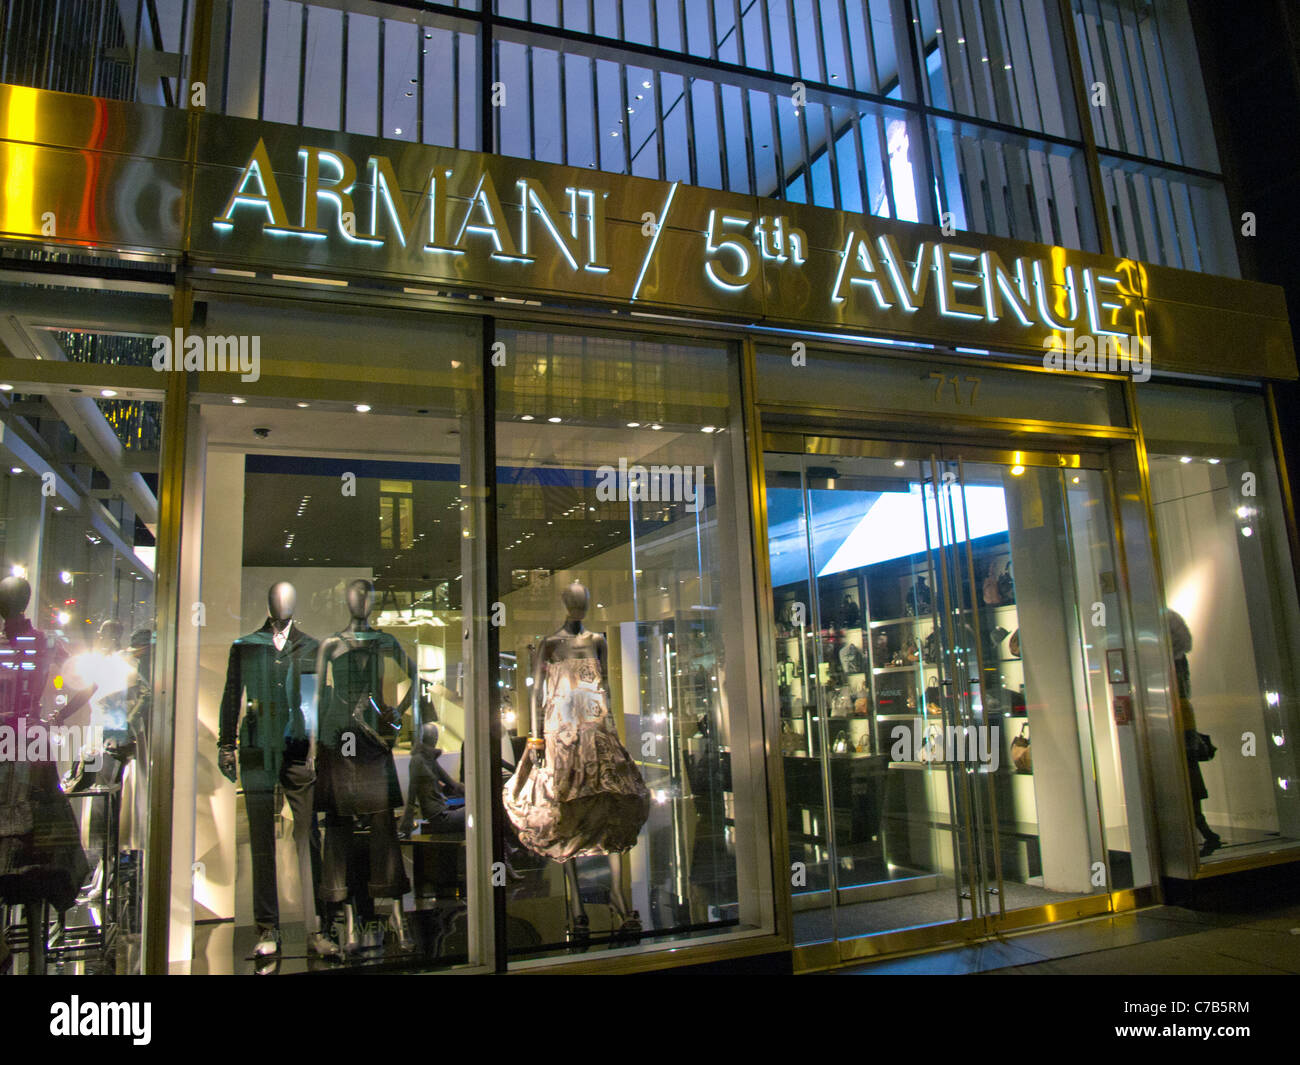 Armani store on 5th avenue in New York City Stock Photo, Royalty Free ...